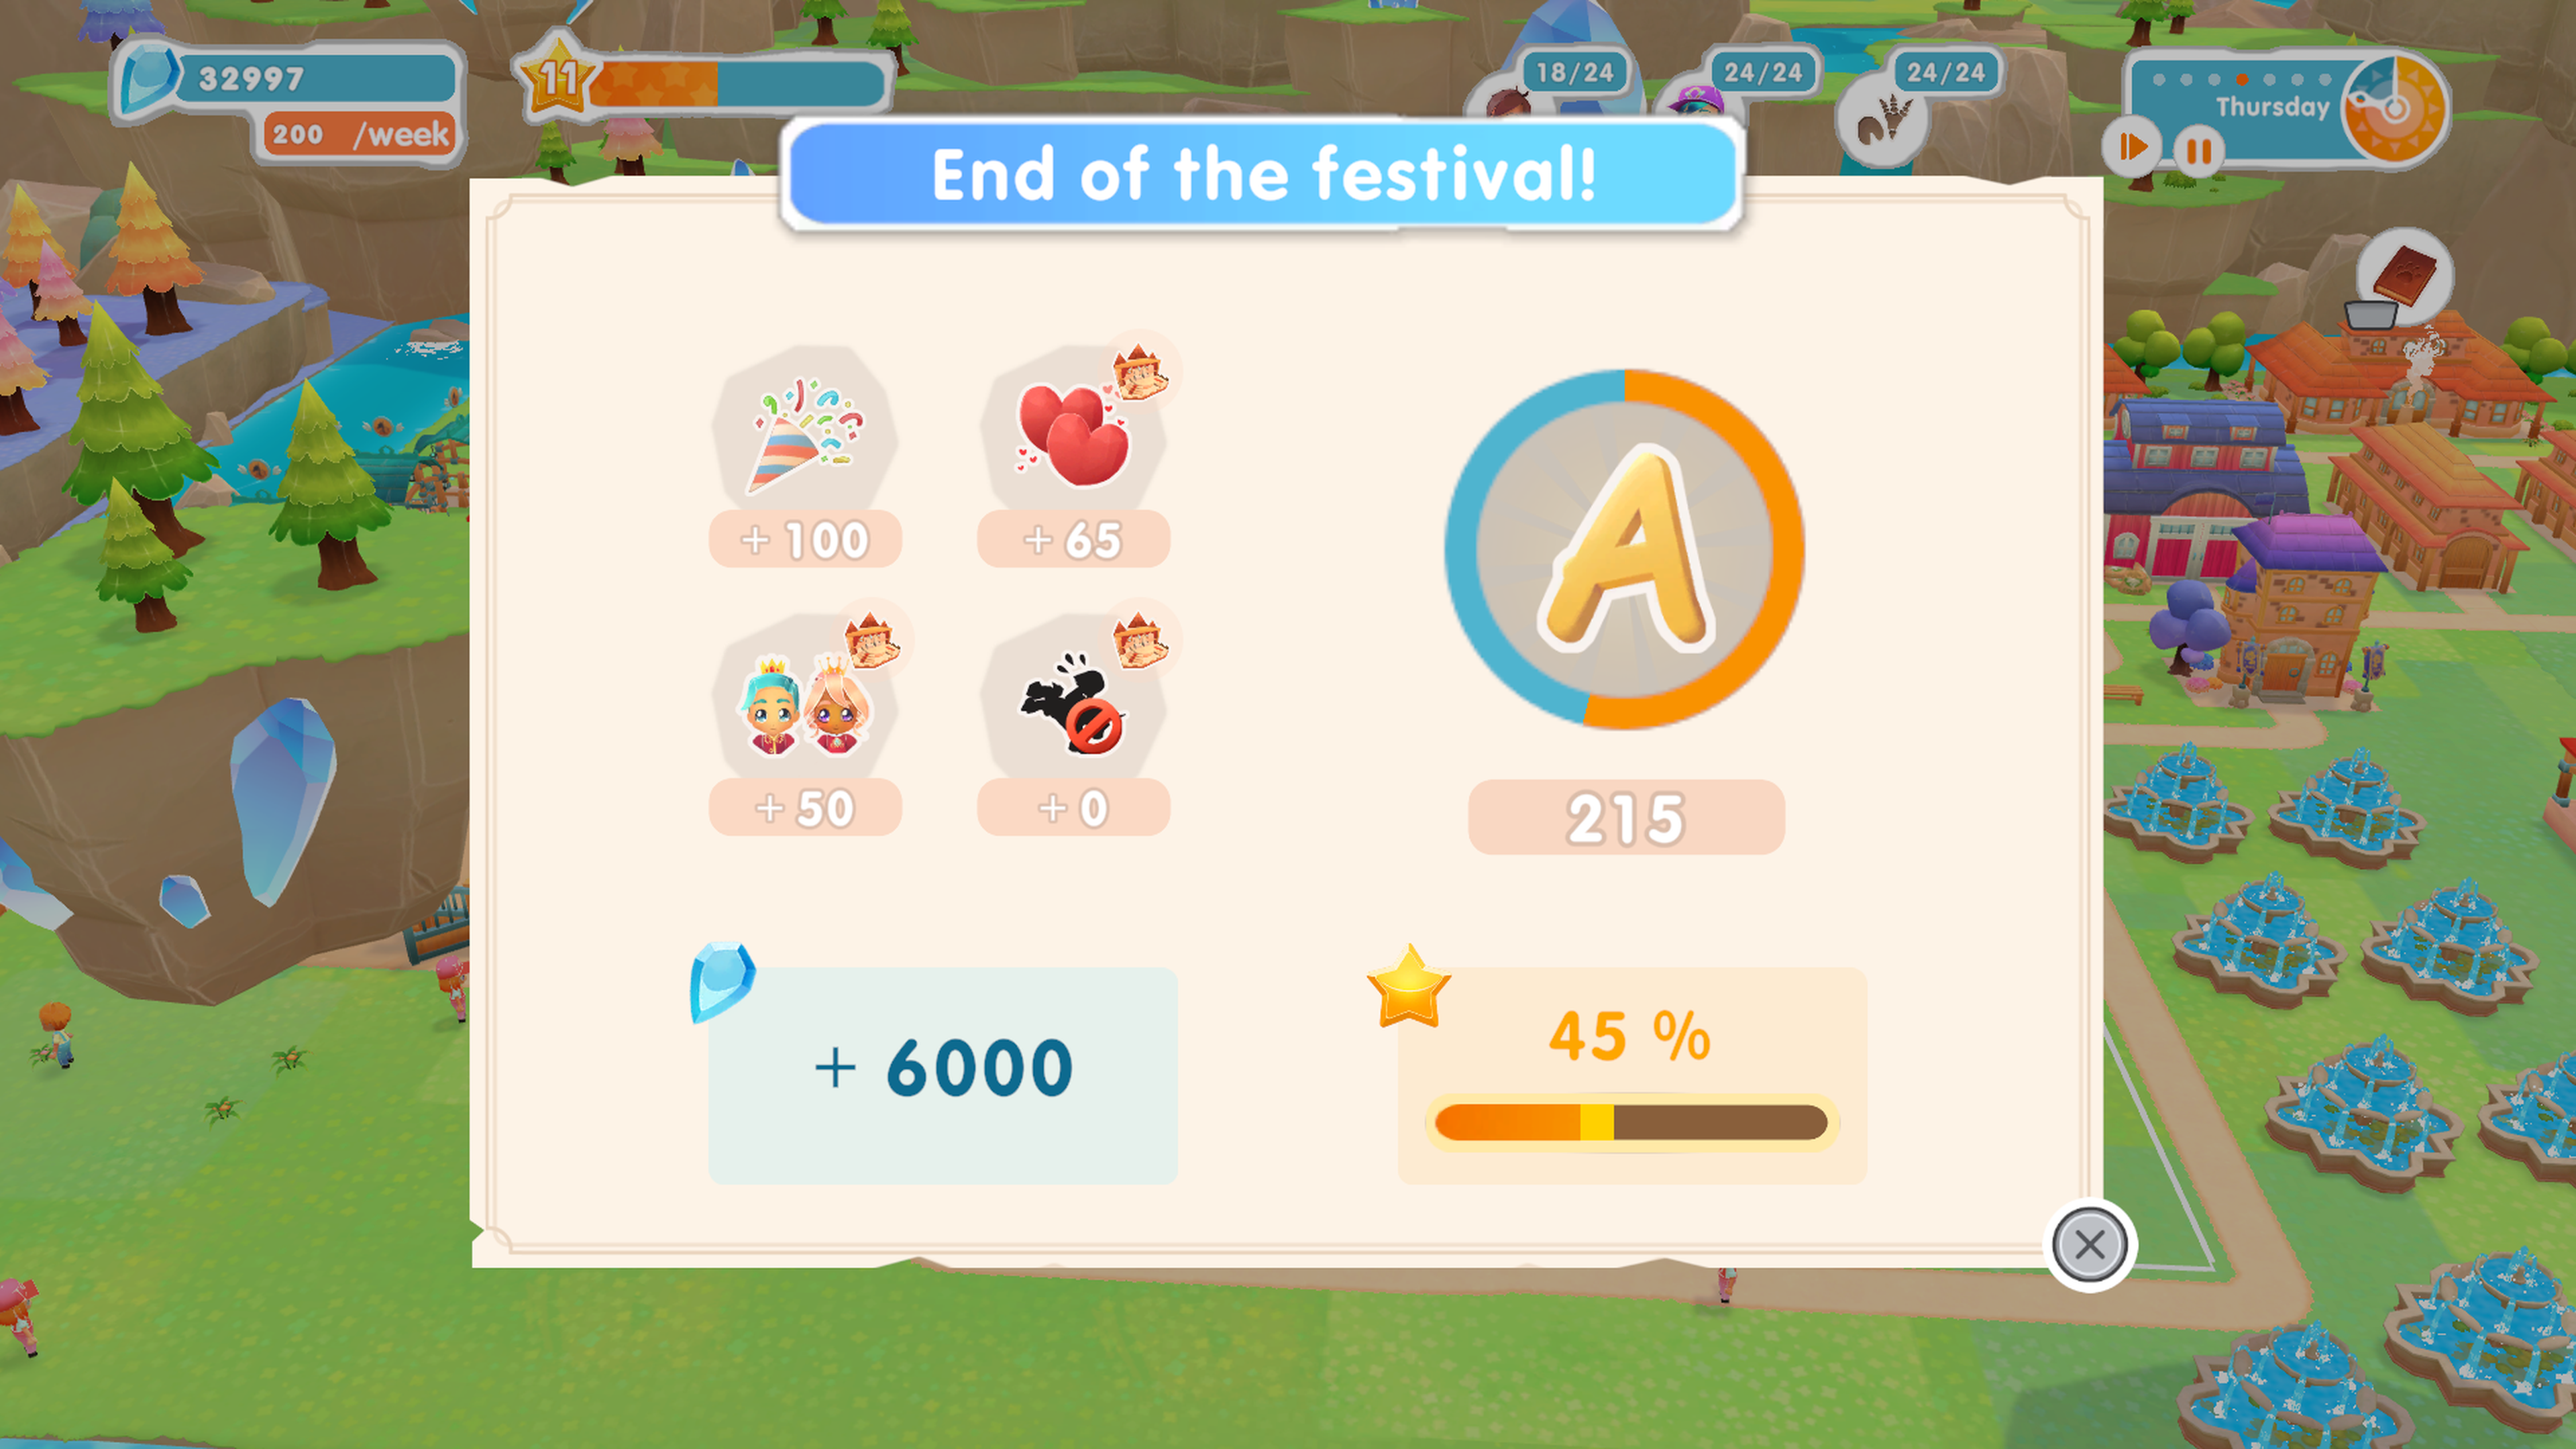 End of festival score card showing the points awarded to each part of the festival and the overall Award achieved. Here the award rating is 'A' with 6000 gems awarded for the achievement.